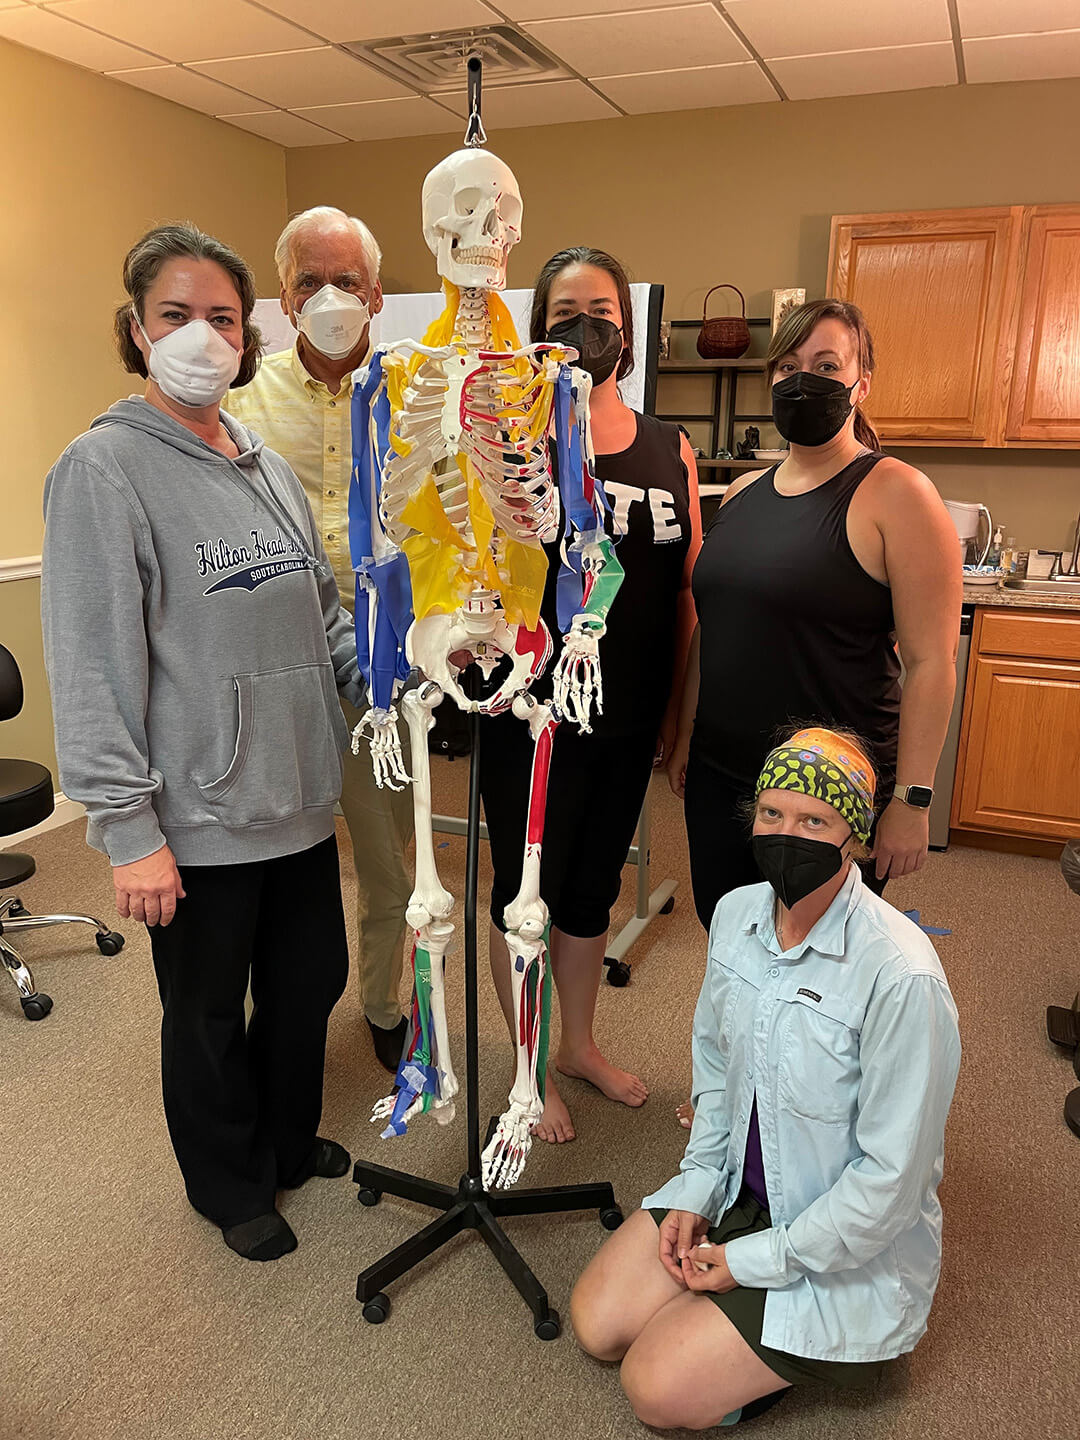 Rolfing Structural Integration students at the Dr. Ida Rolf Institute, taking a break with the model skeleton, during the anatomical review portion of the accredited course to become certified Rolfers.